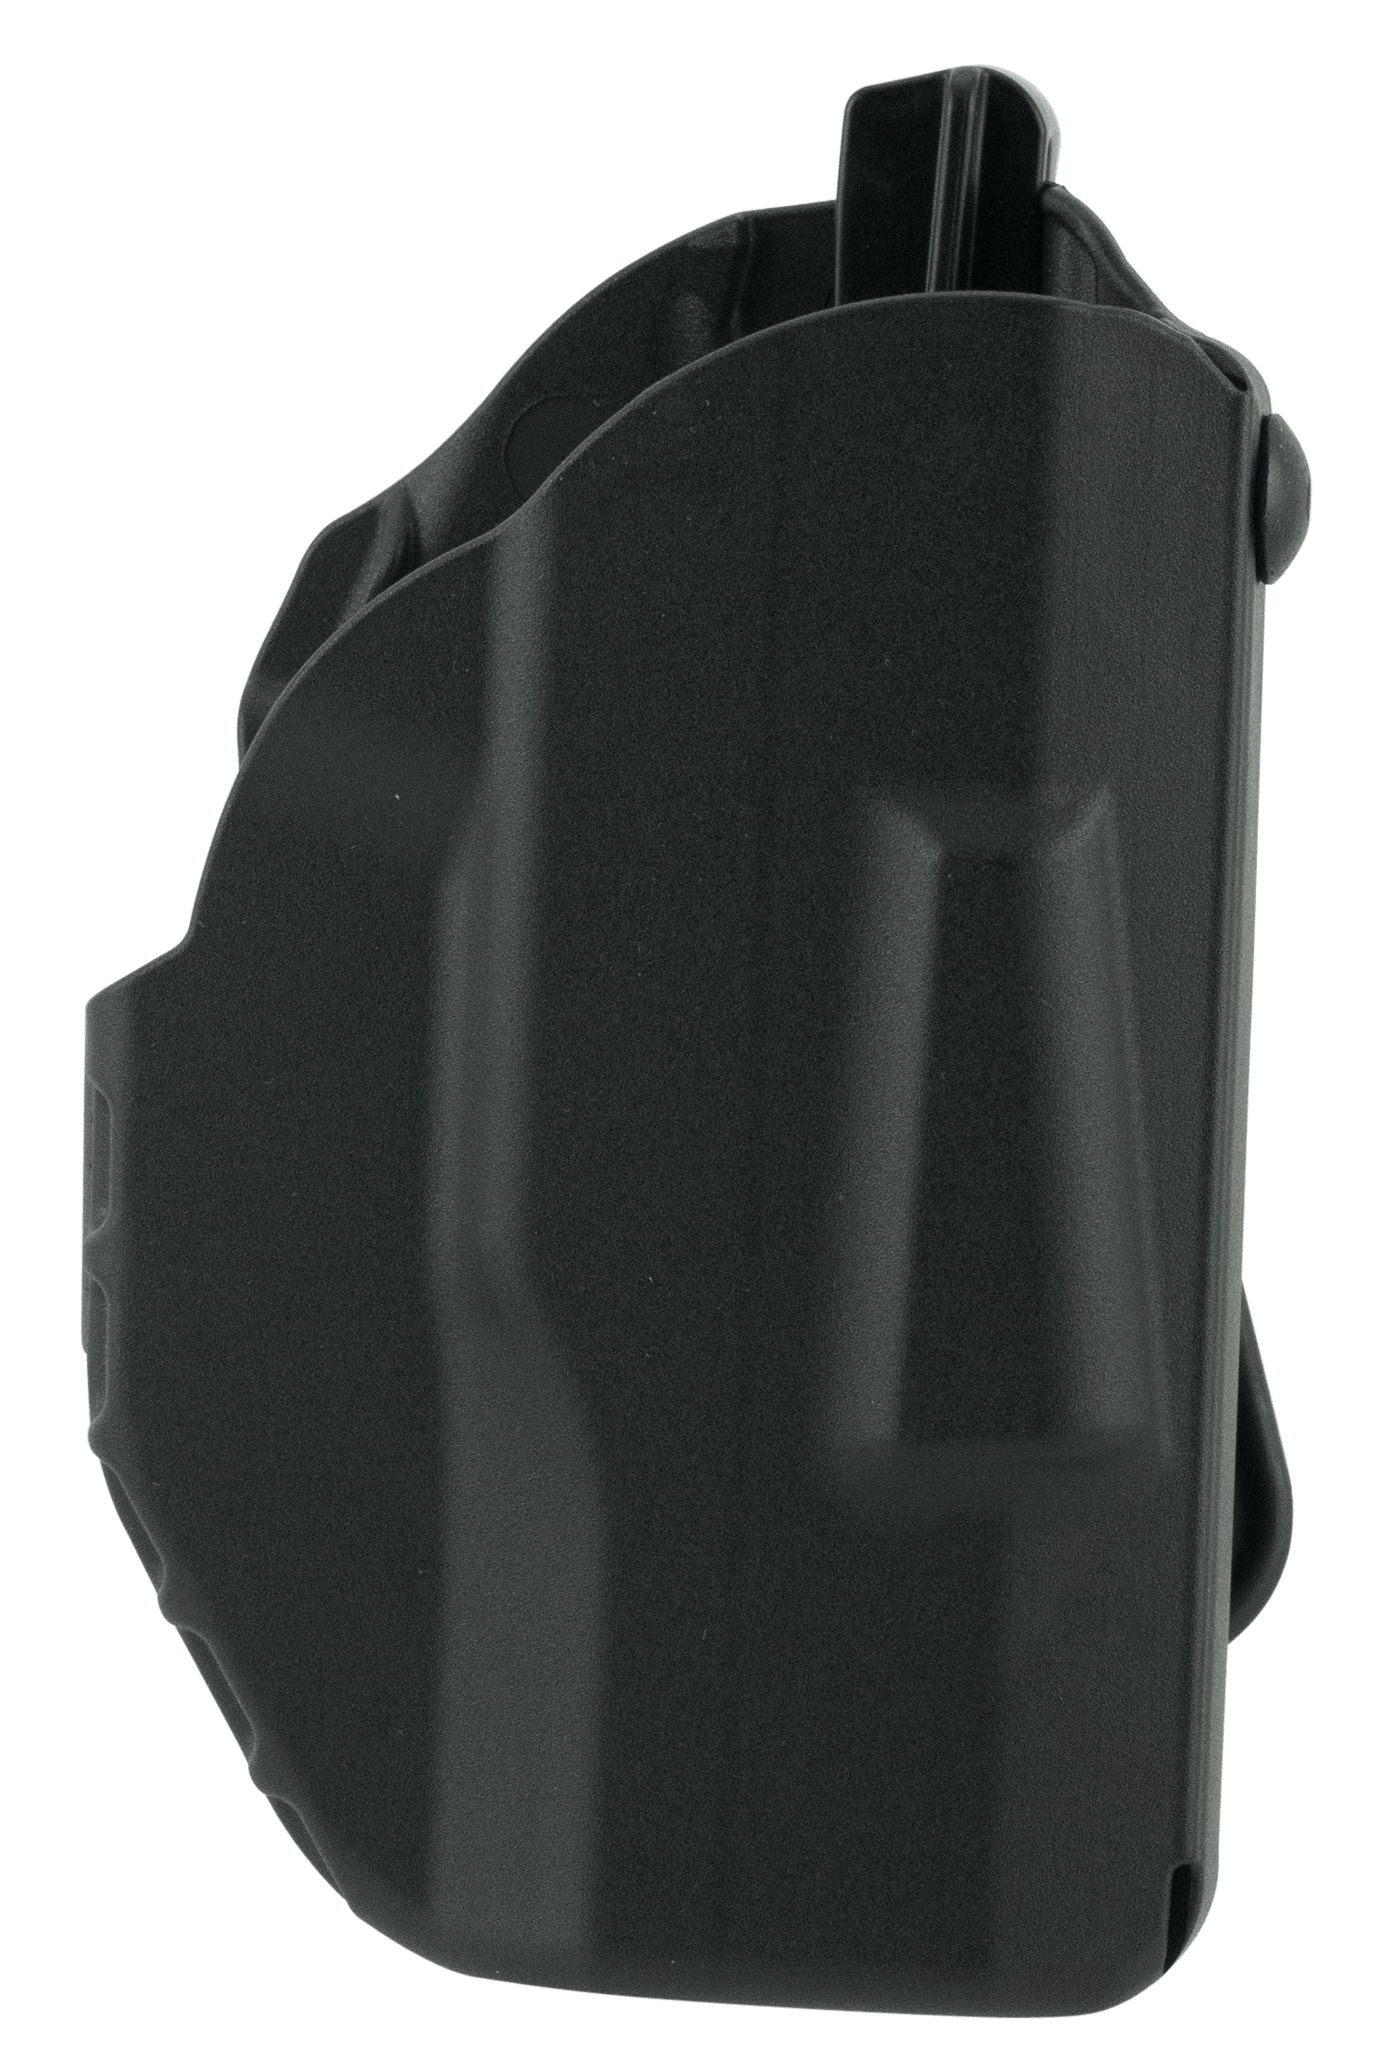 Safariland Safariland 7371 7ts Concealmnt - Paddle Hlstr Ruger Lc9/9s Blk! Firearm Accessories